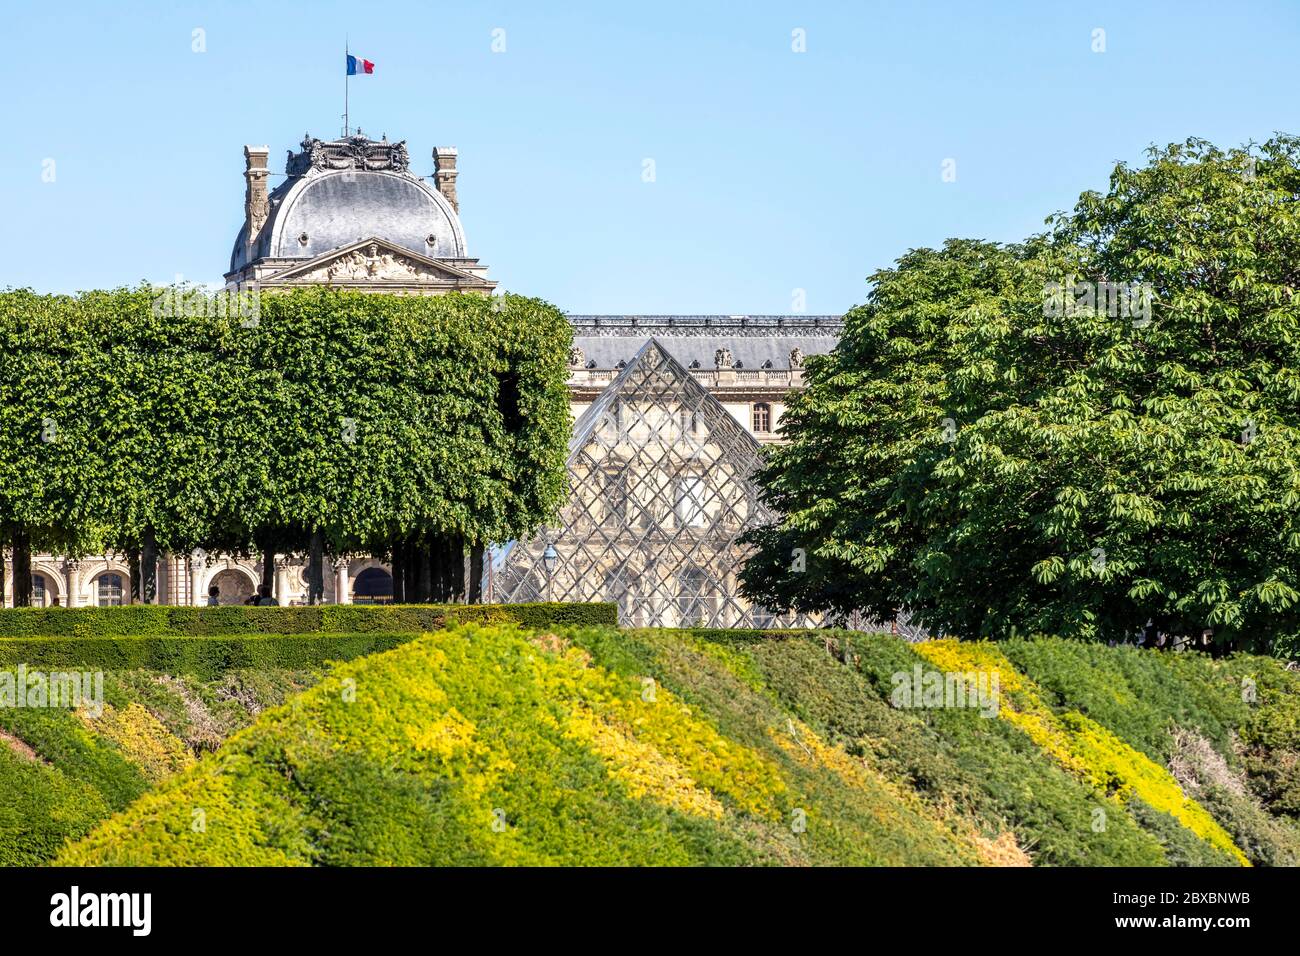 Paris, France - May 29, 2020: Louvre museum as seen from Jardin des Tuileries in Paris Stock Photo